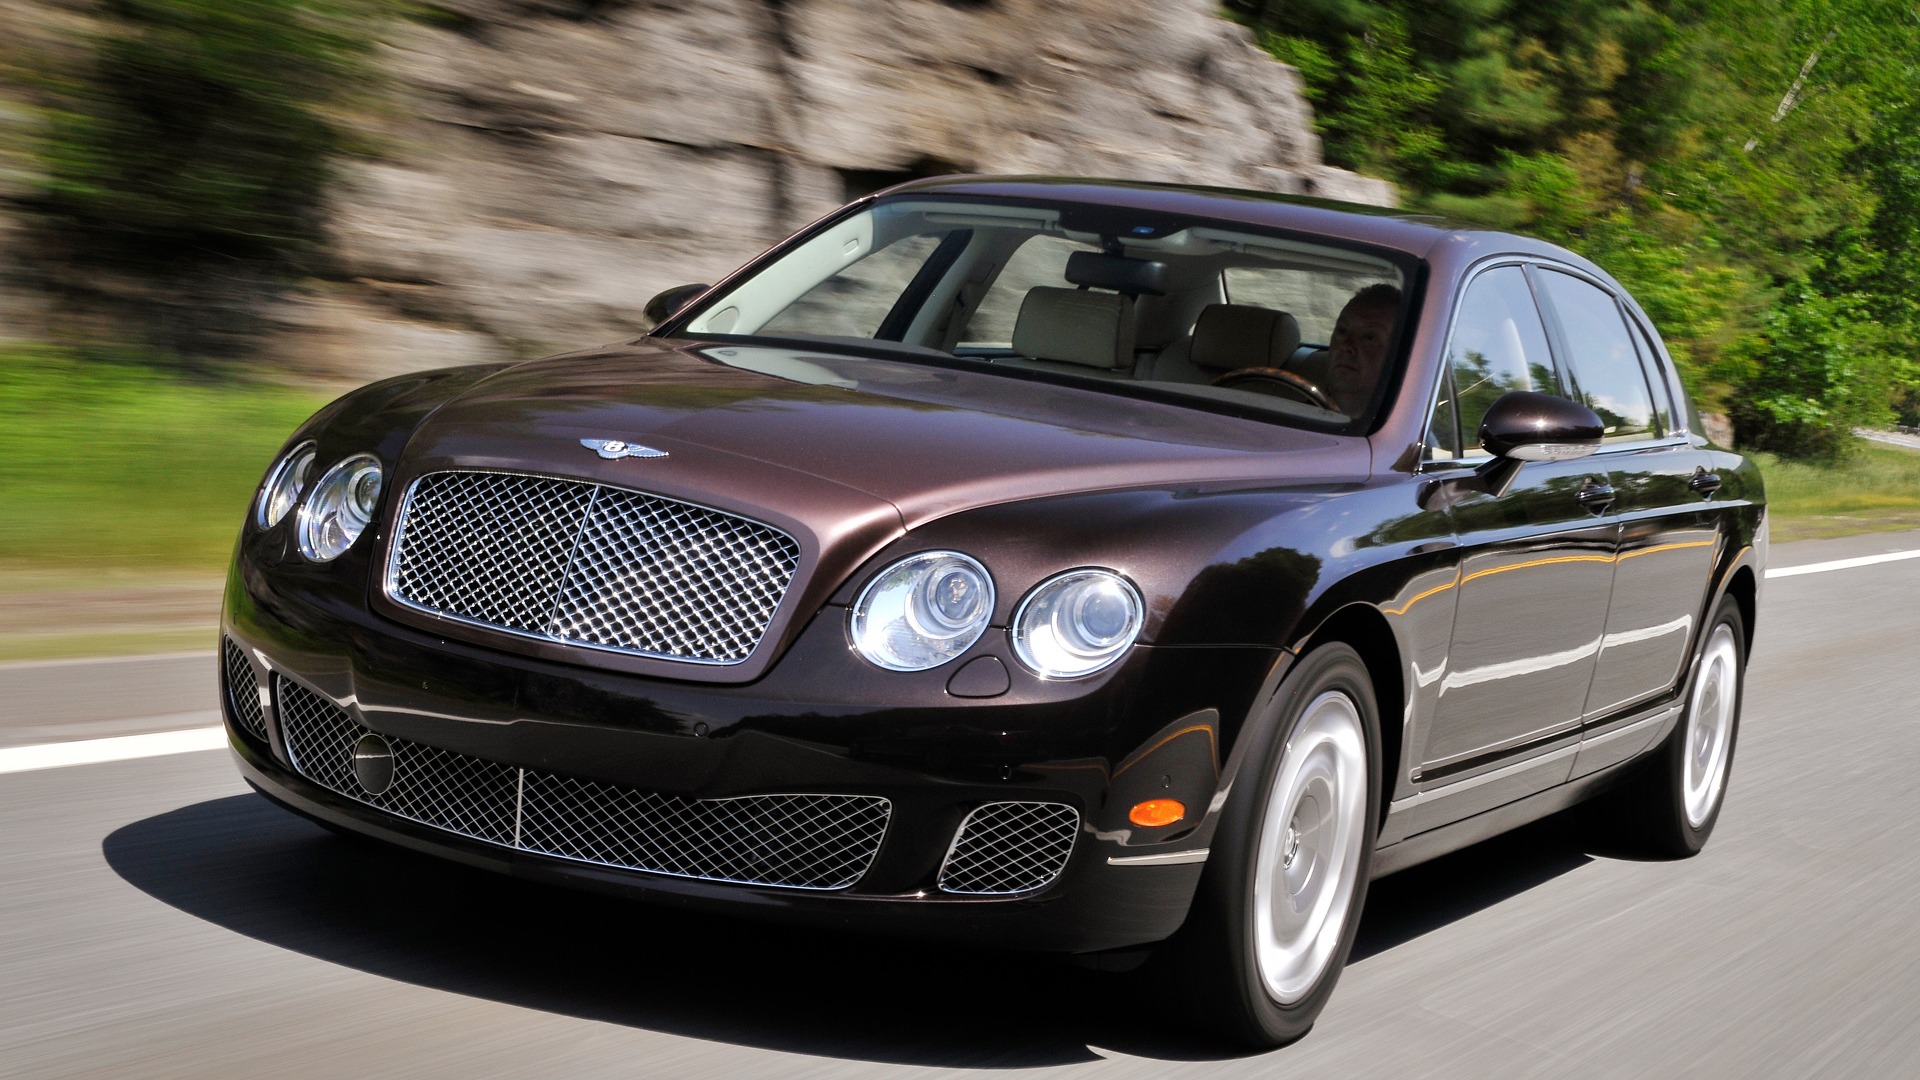 Bentley Continental Flying Spur - 2008 賓利 #16 - 1920x1080